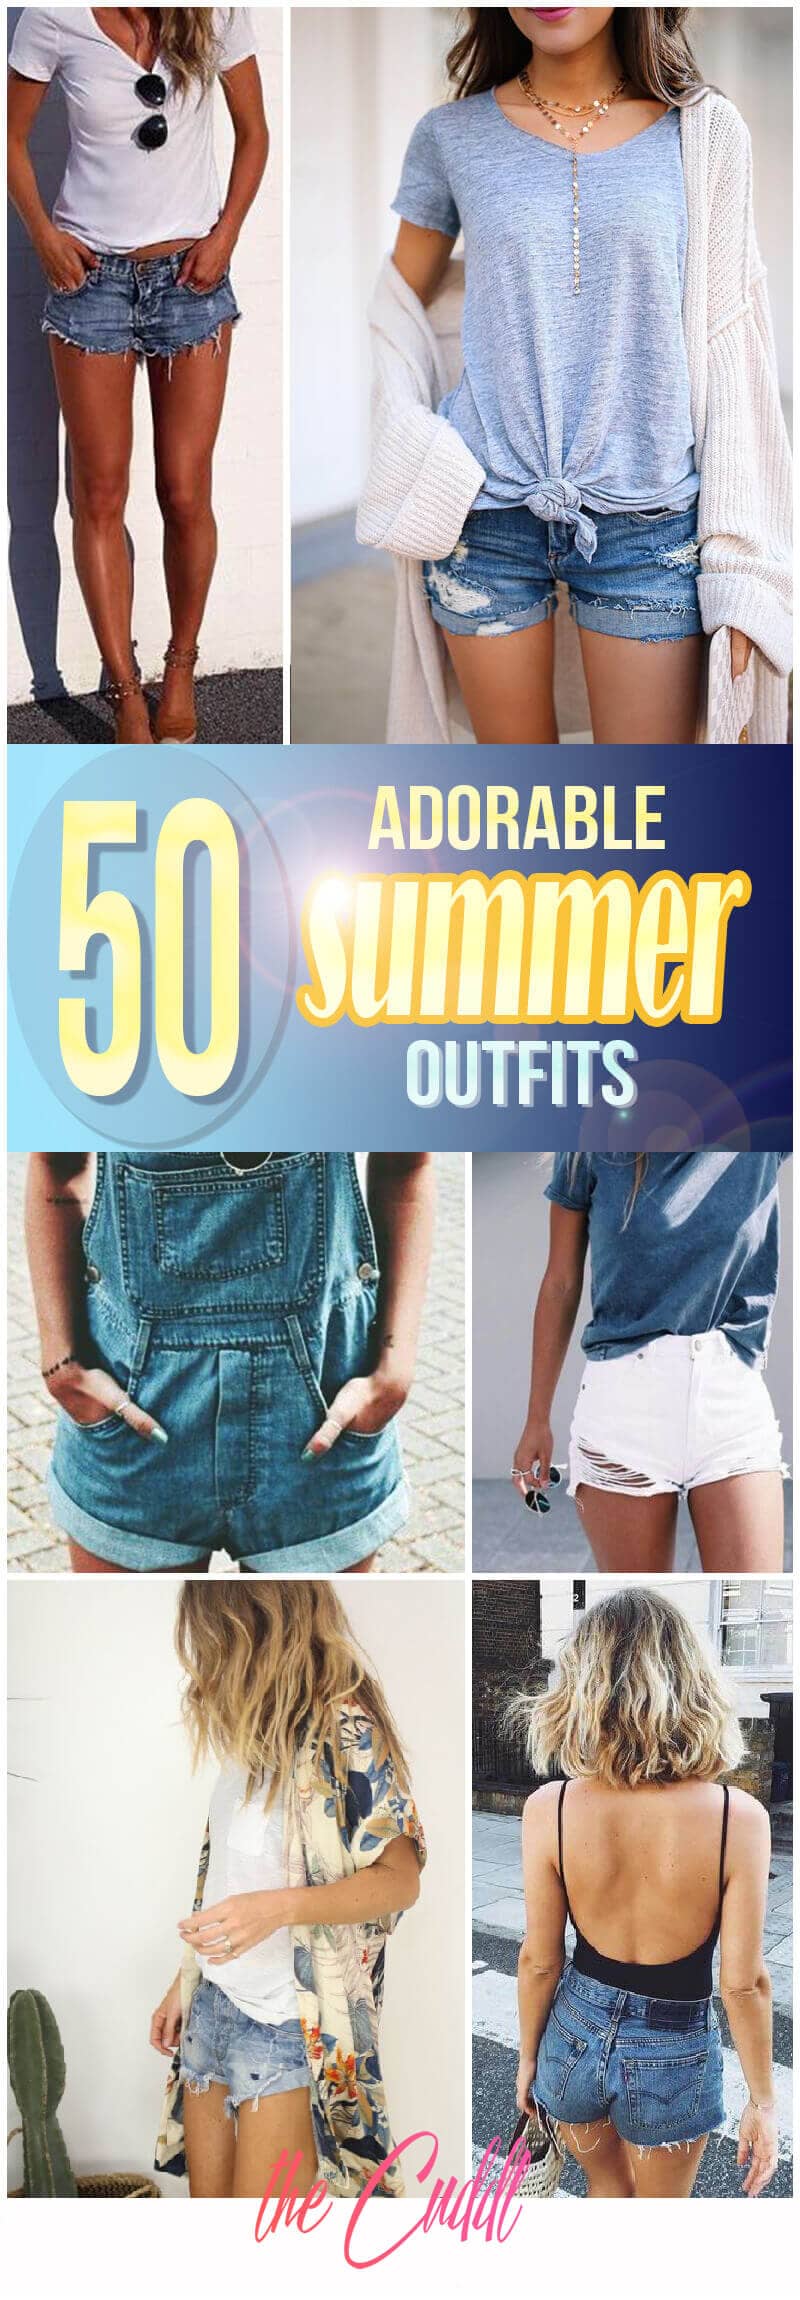 50 Adorable Summer Outfits